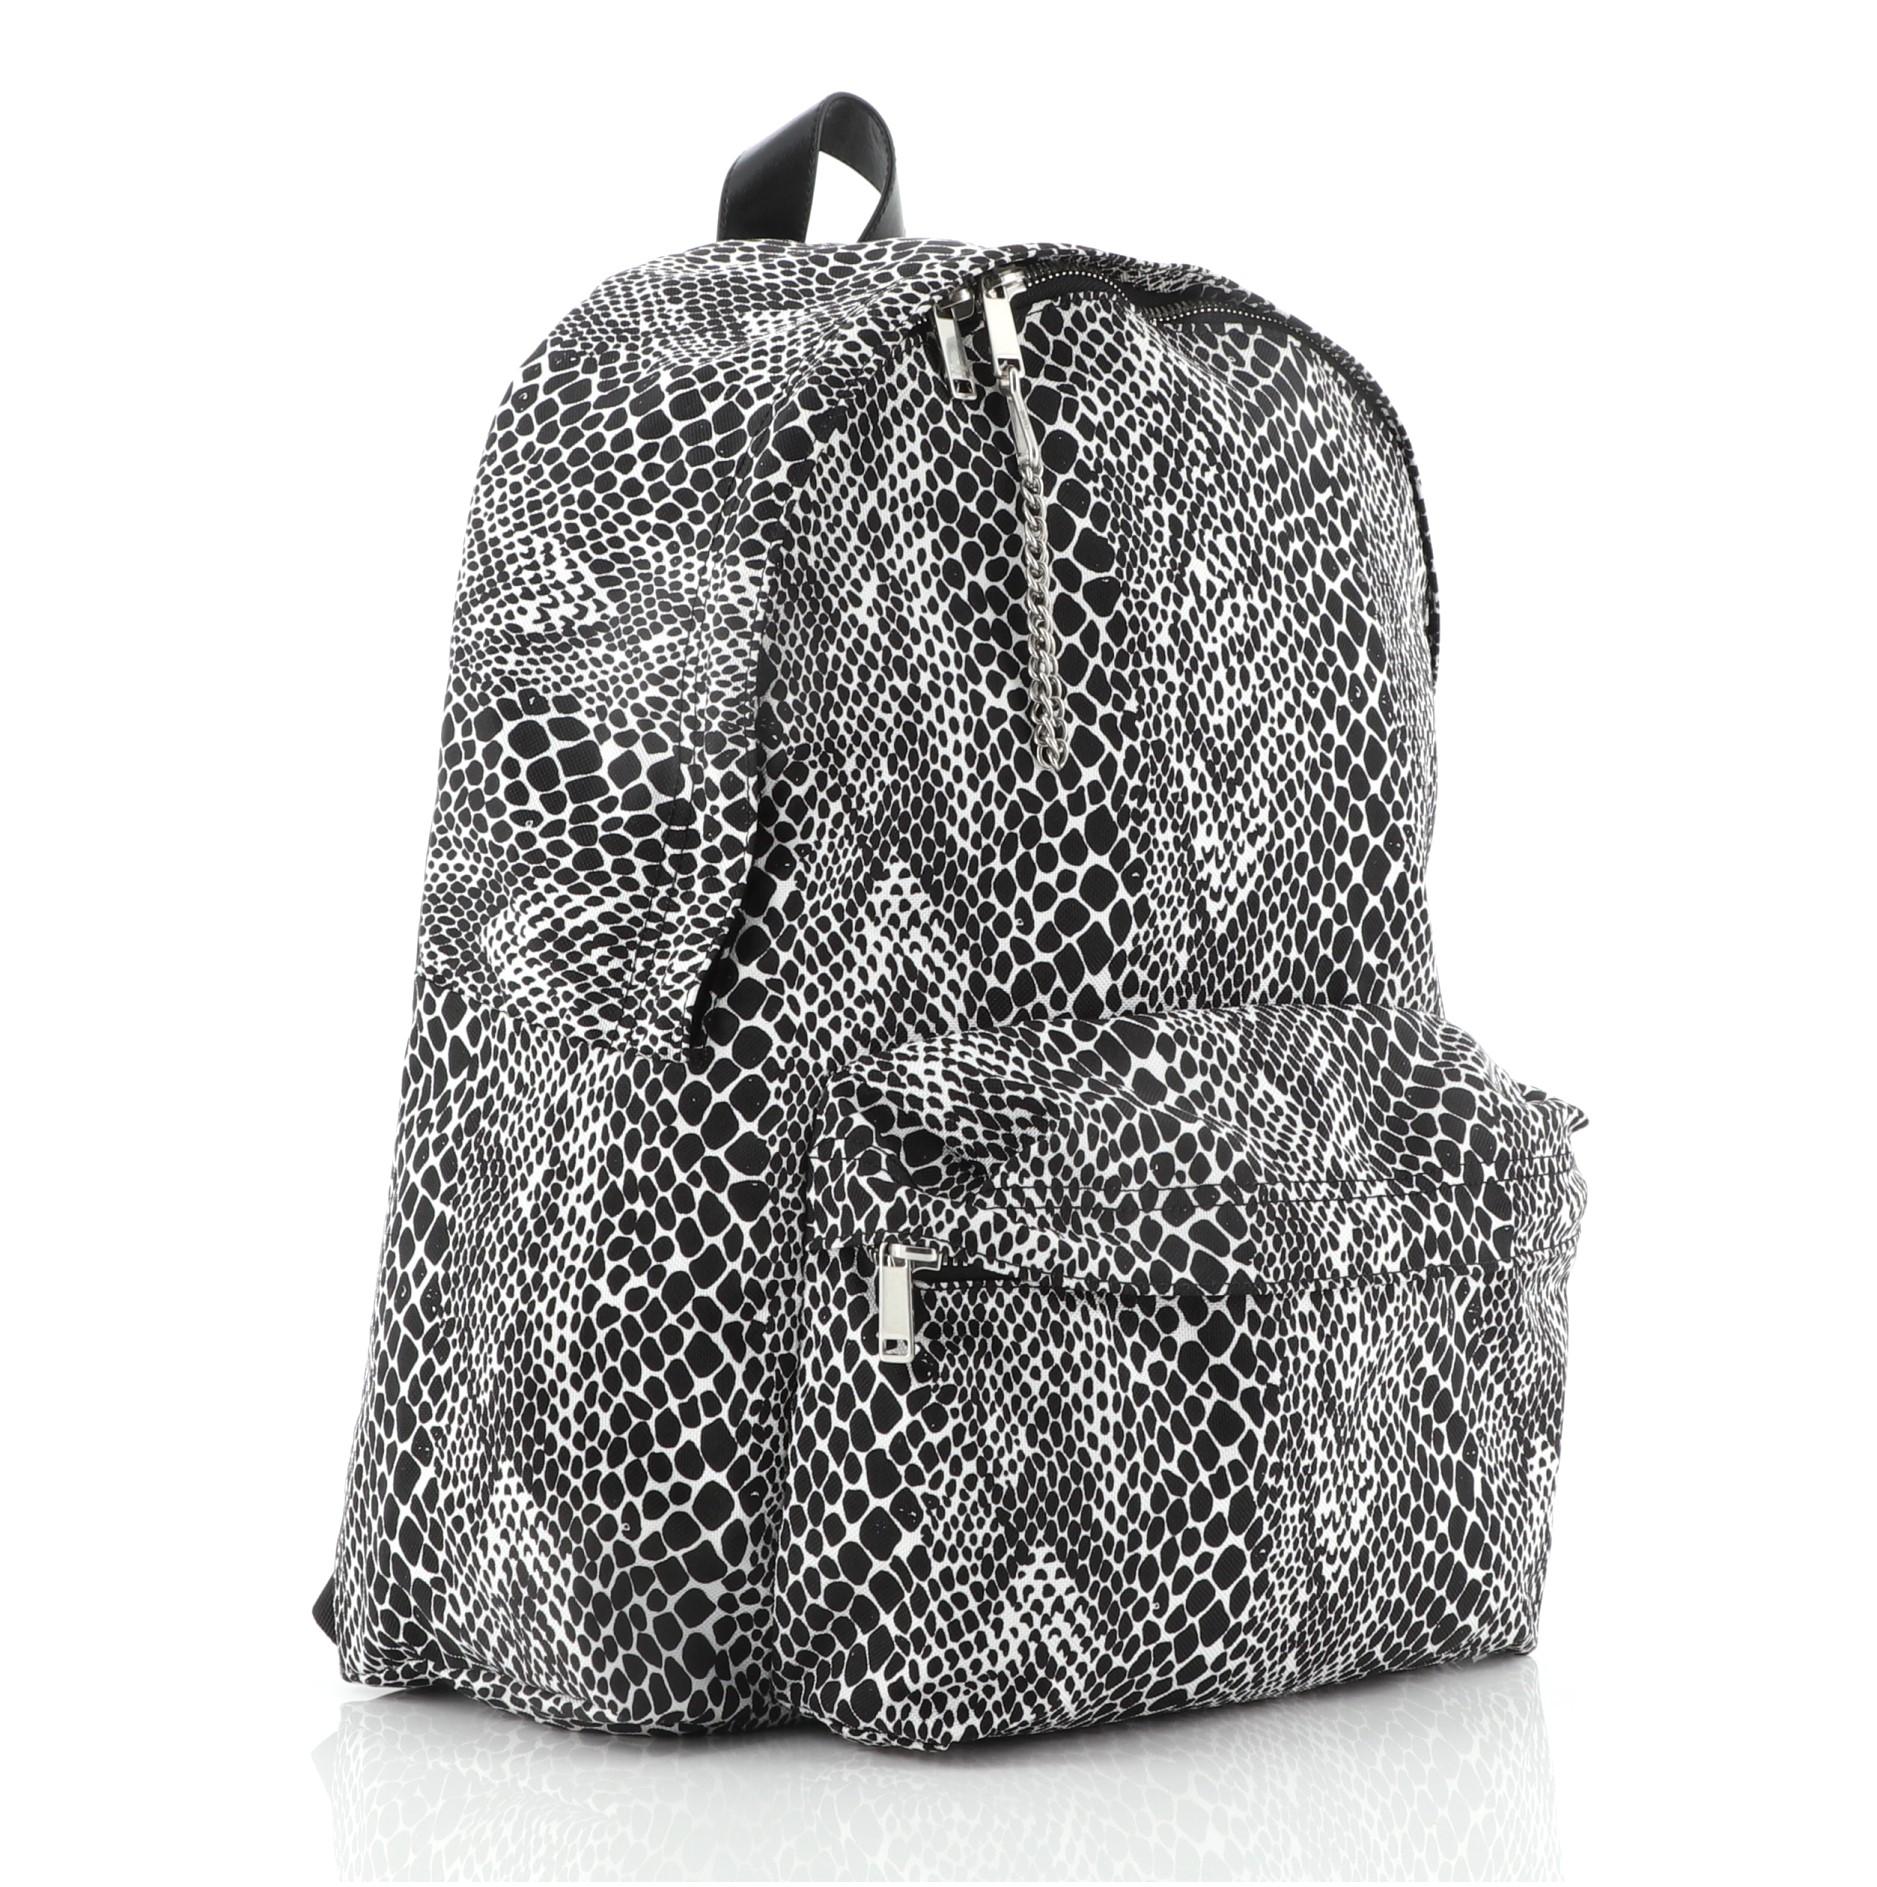 Celine Zip Around Backpack Printed Canvas Medium
Black, Print, White

Condition Details: Creasing and light wear on exterior and in interior, scratches on hardware.

50144MSC

Height 17